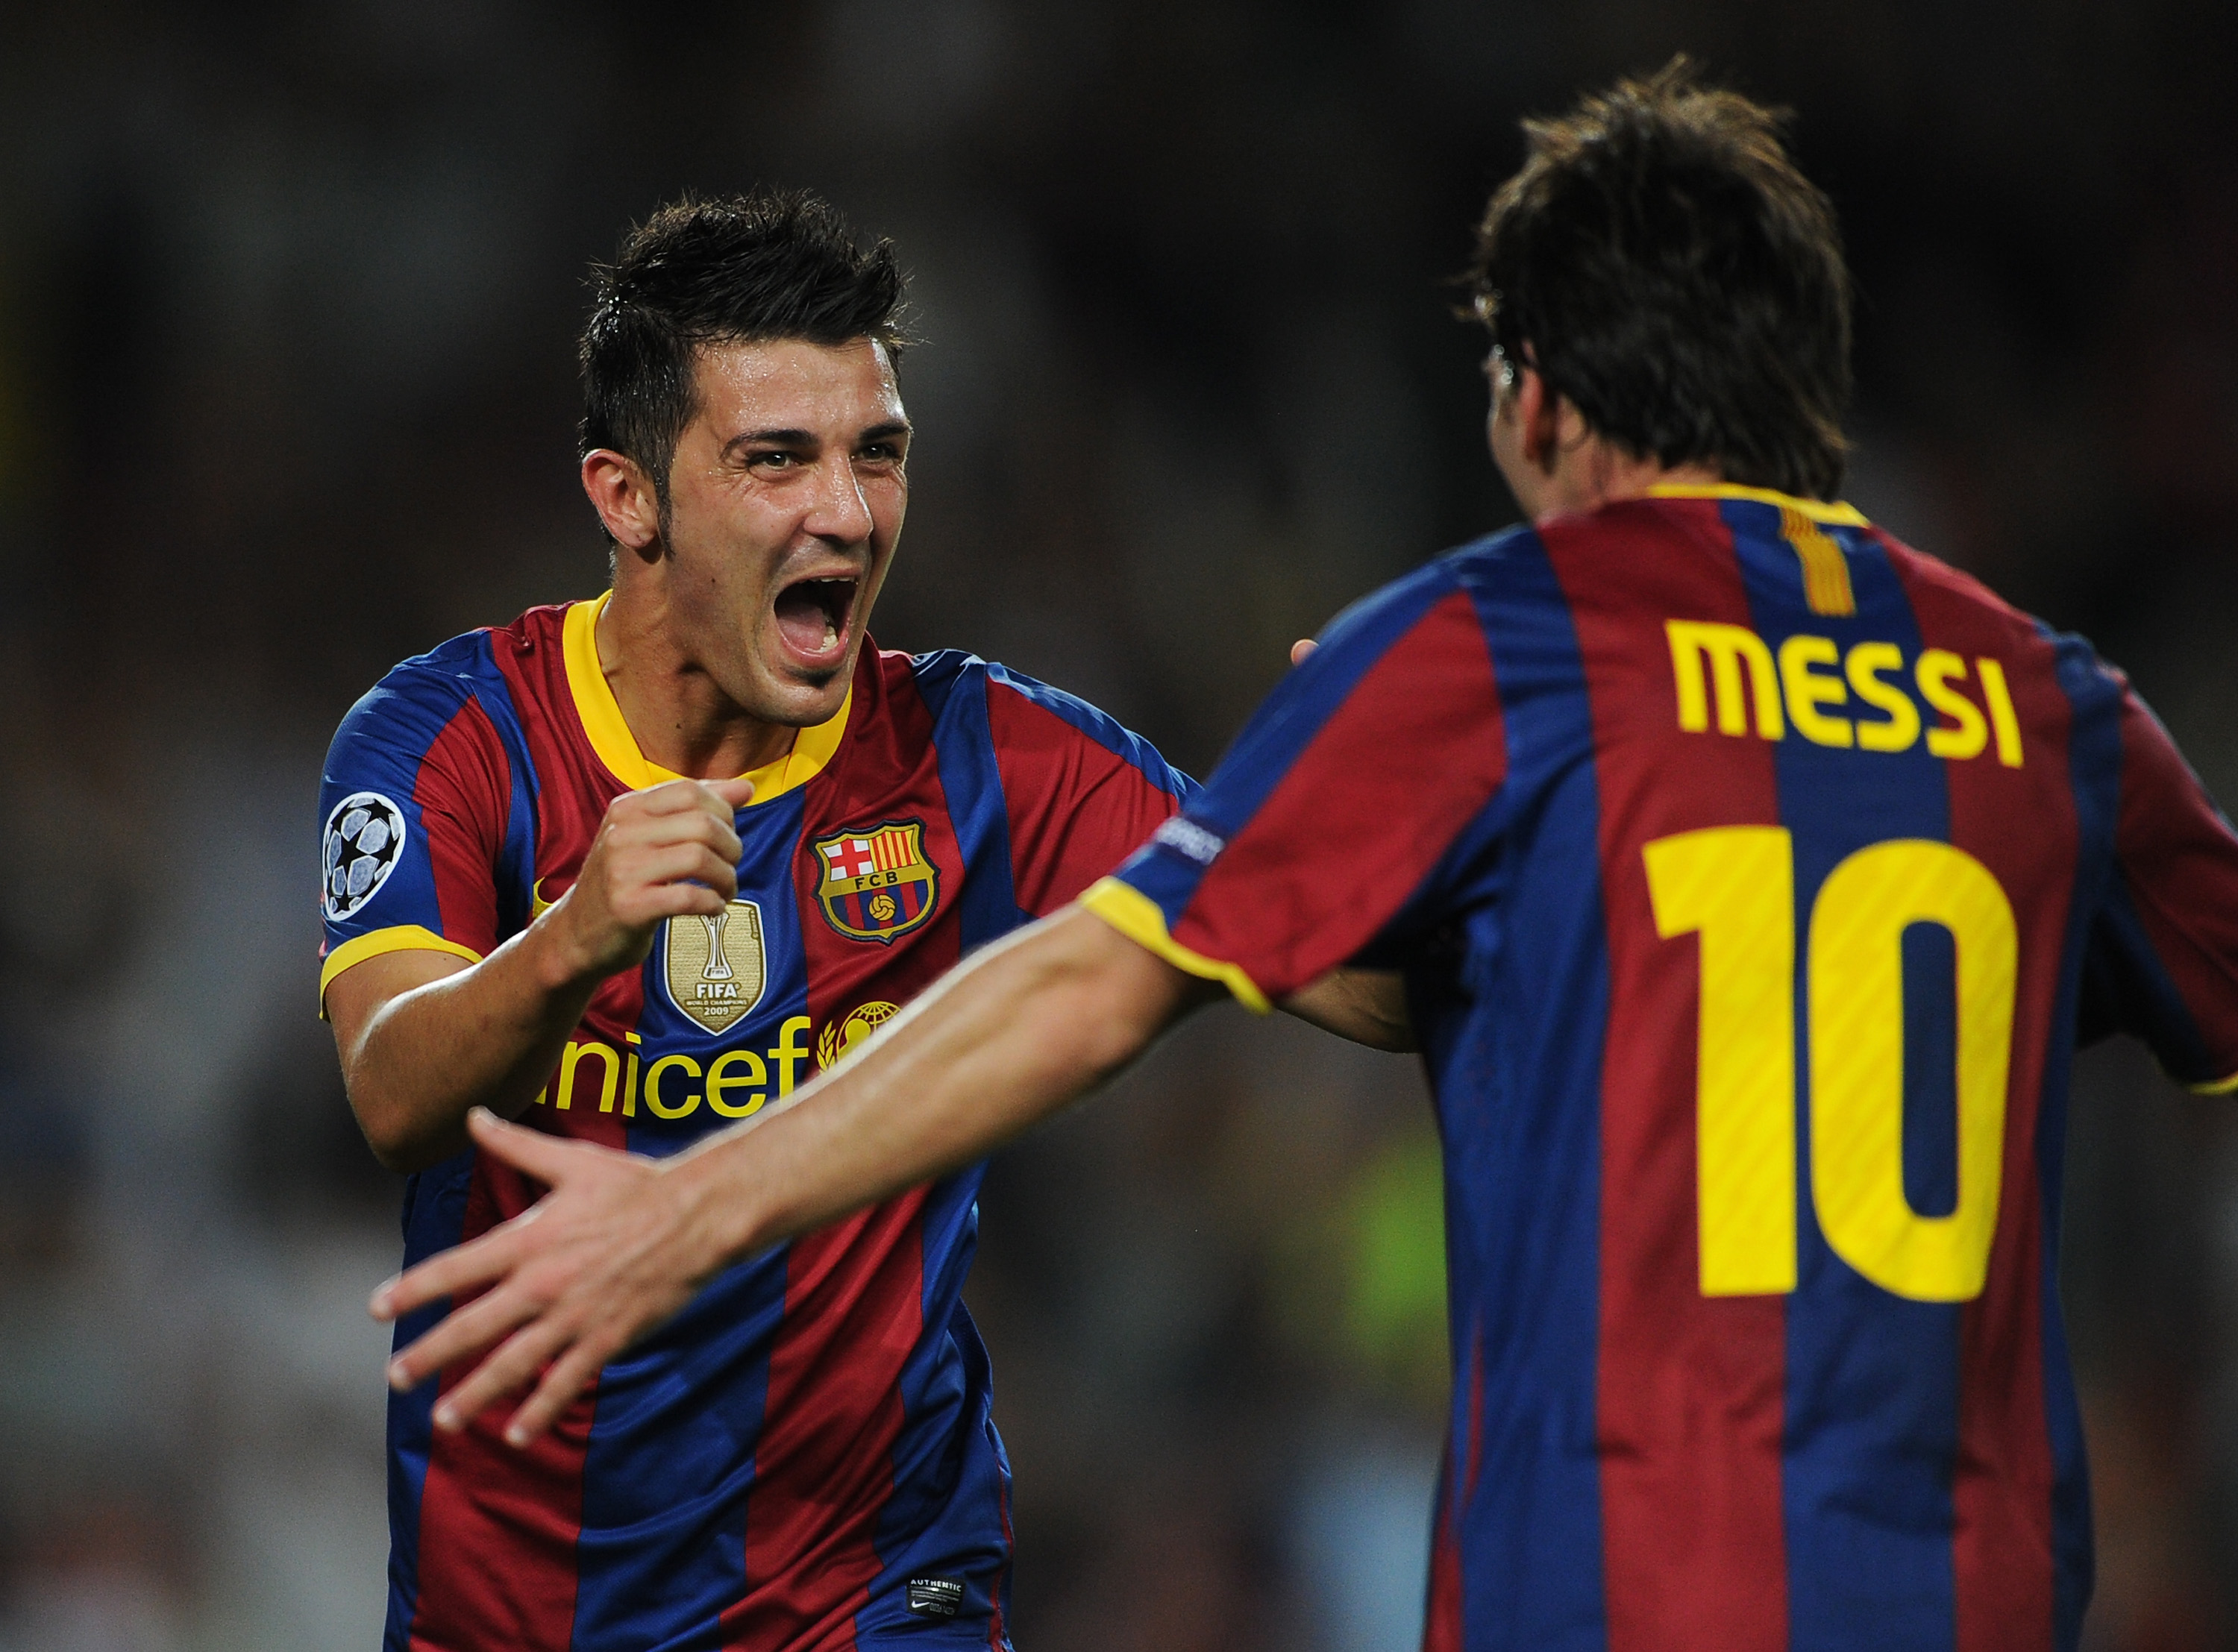 BARCELONA, SPAIN - SEPTEMBER 14:  David Villa (L) of Barcelona celebrates scoring his sides second goal with his teammate Lionel Messi during the UEFA Champions League group D match between Barcelona and Panathinaikos on September 14, 2010 in Barcelona, S